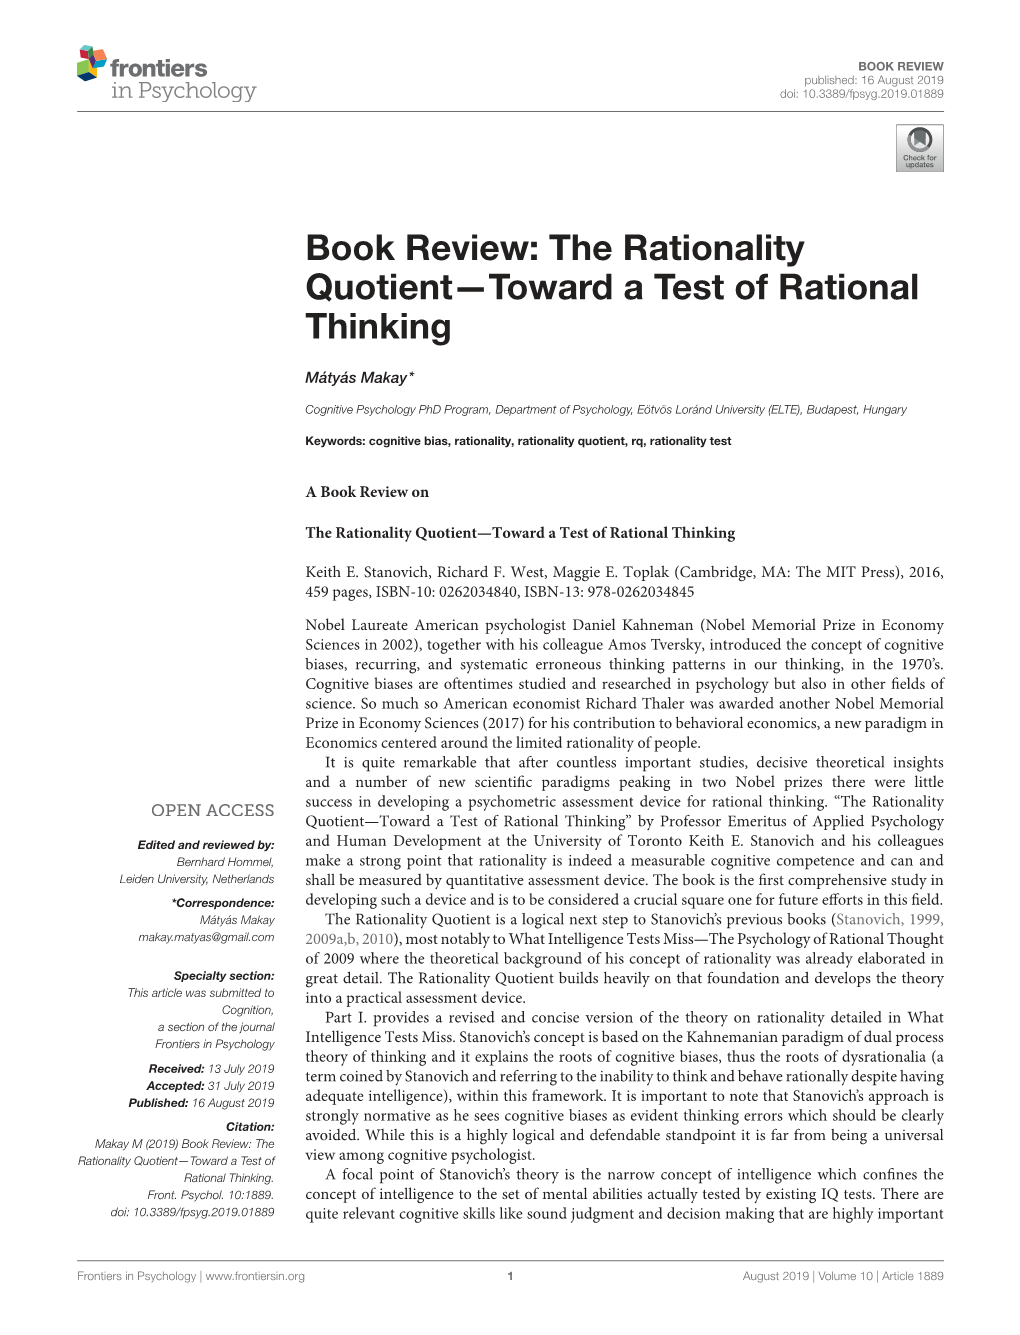 The Rationality Quotient„Toward a Test of Rational Thinking